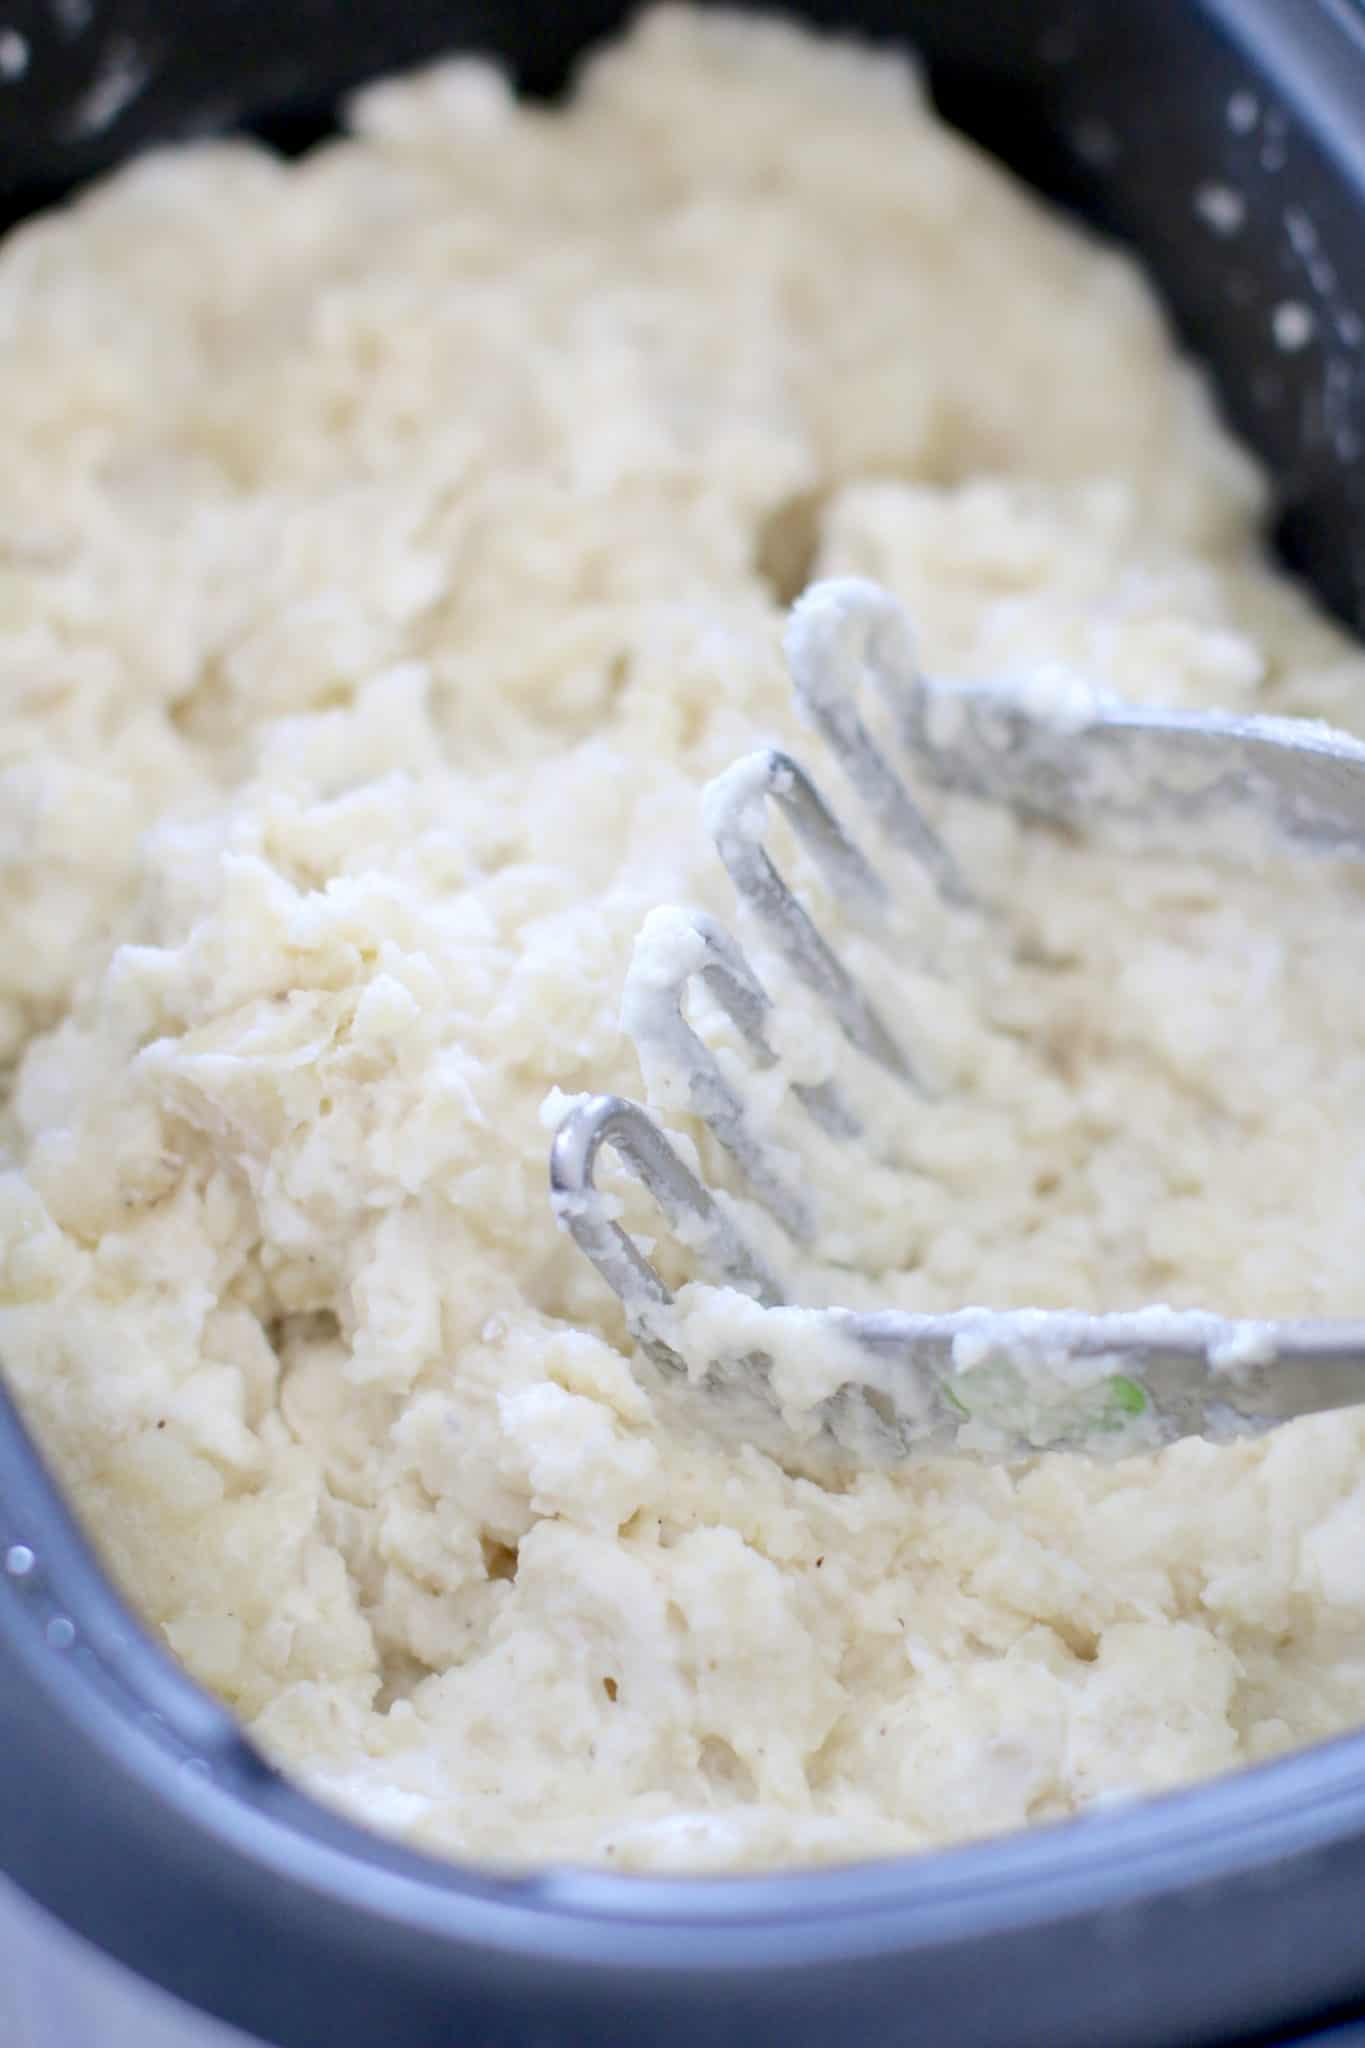 mashed potatoes in slow cooker with a potato masher.